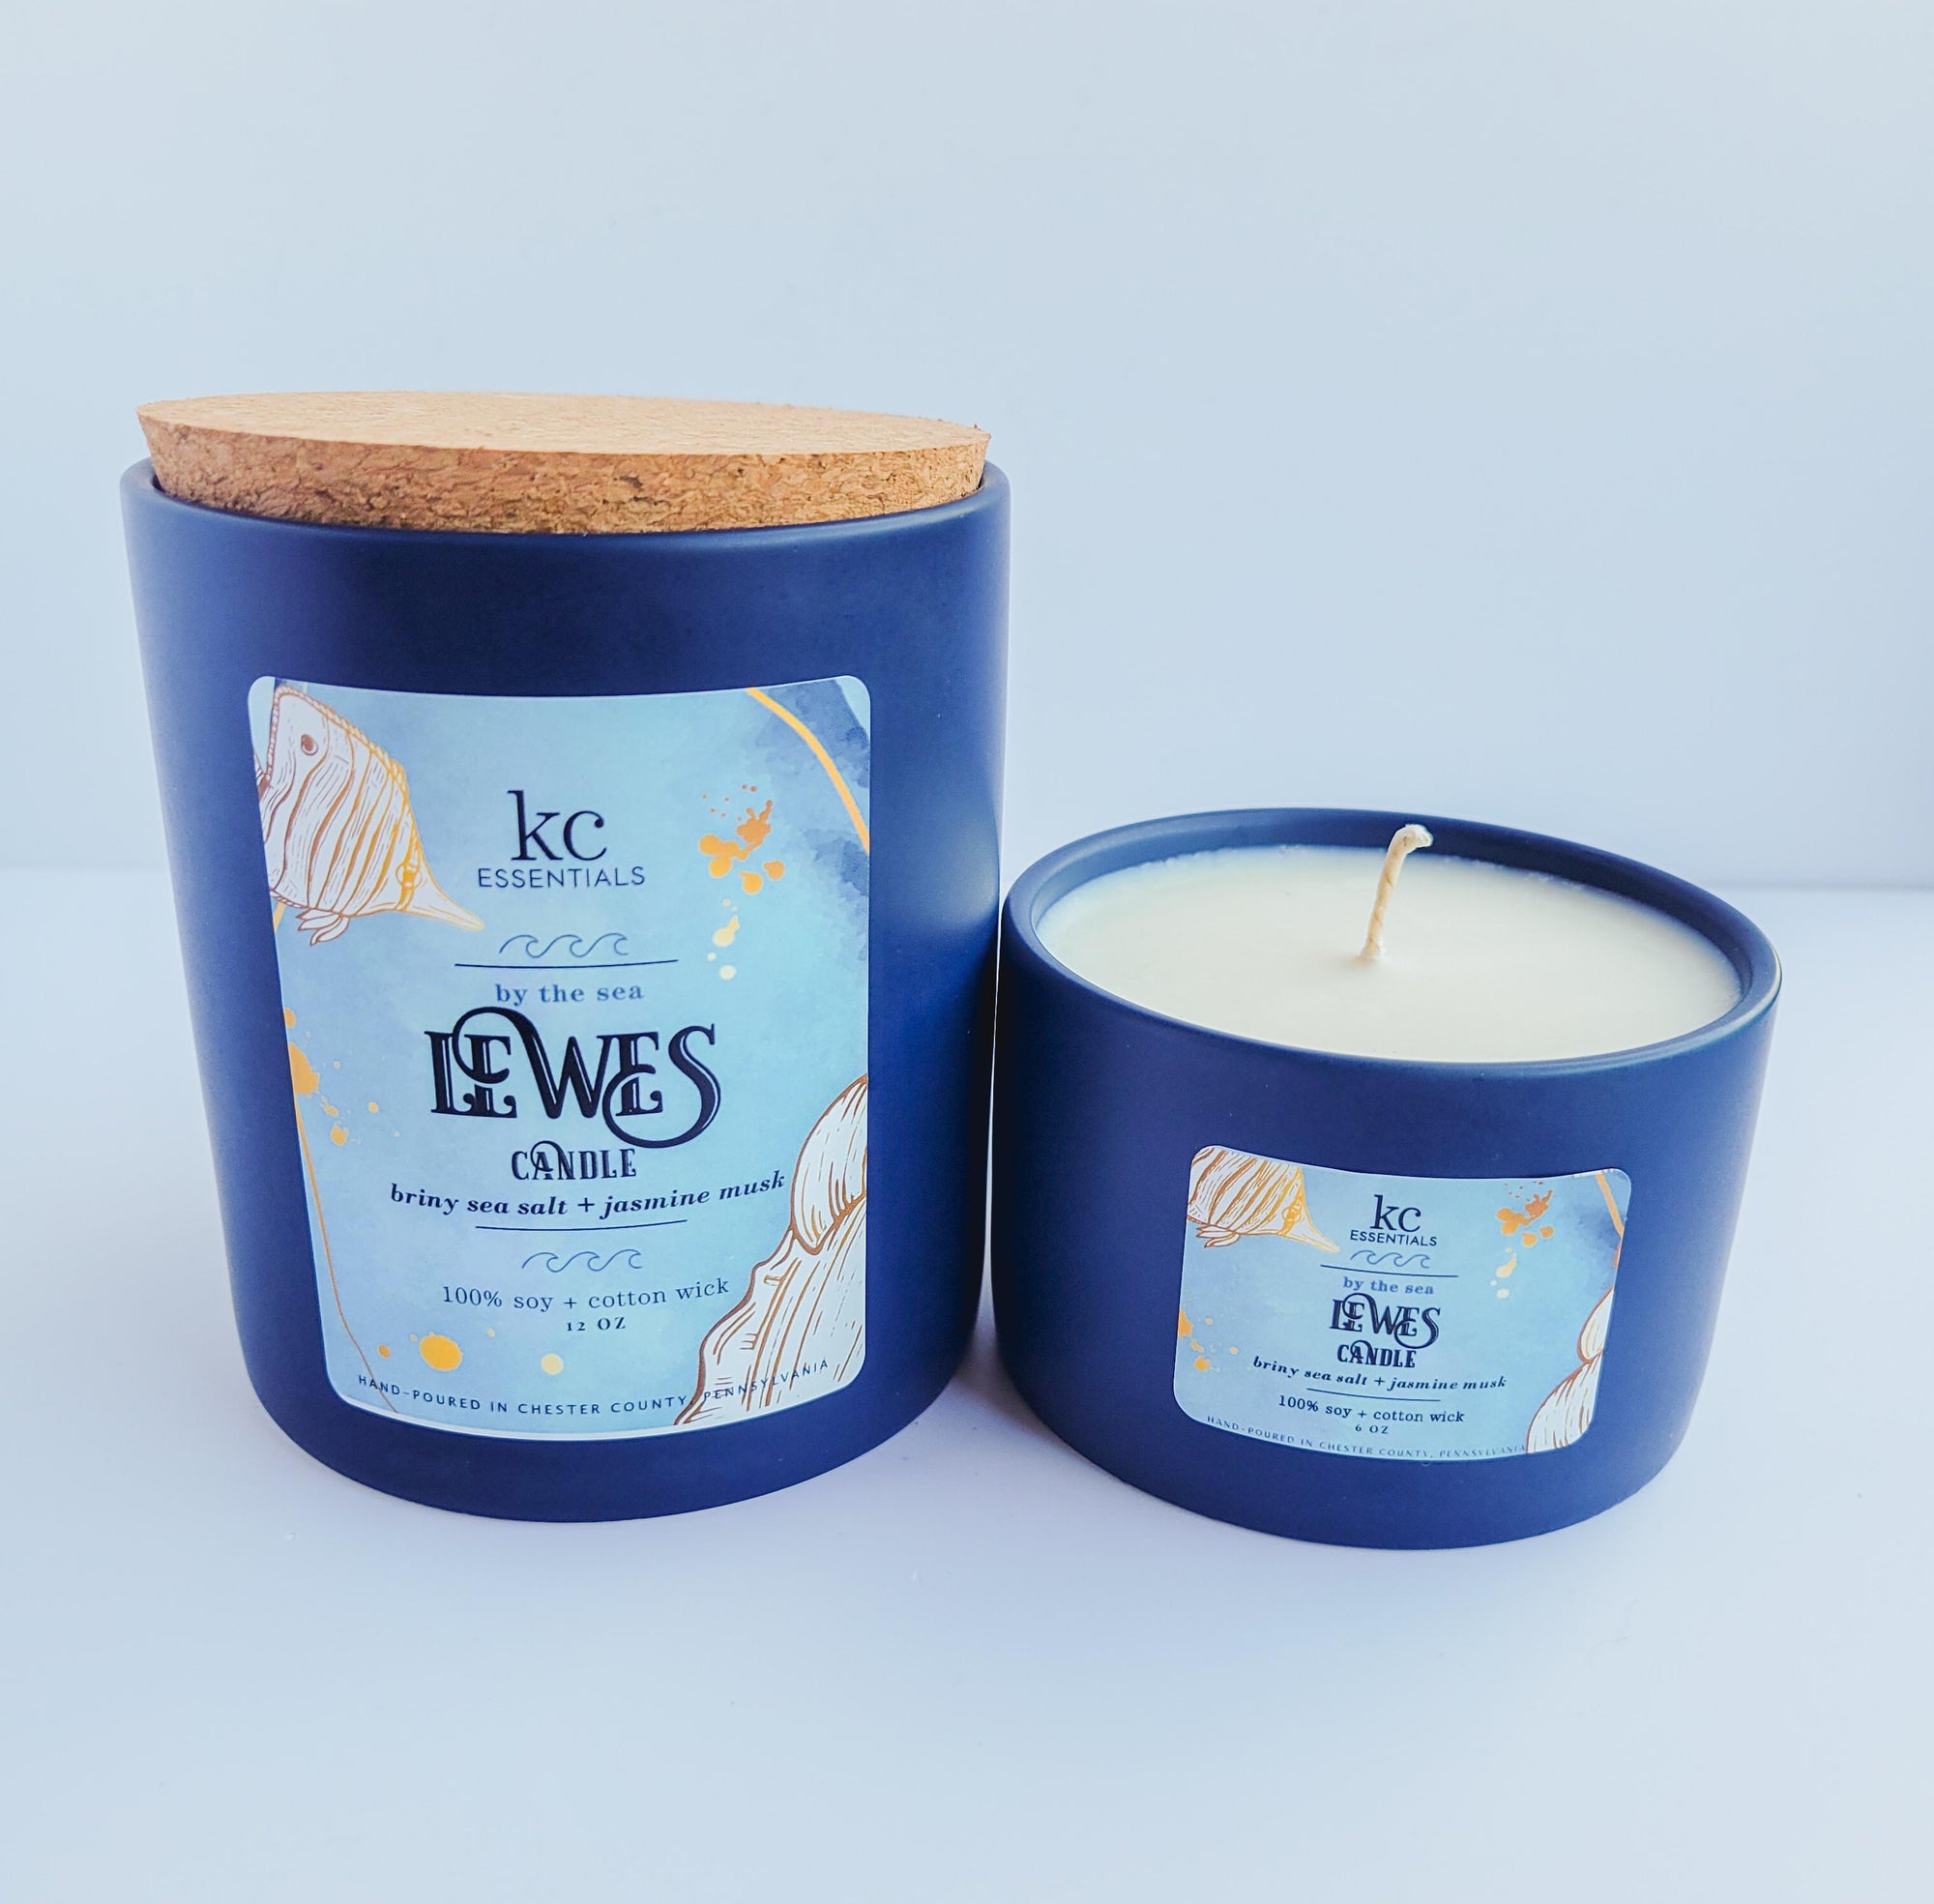 Lewes beach 12 ounce candle made with 100 percent soy, includes cork lid.